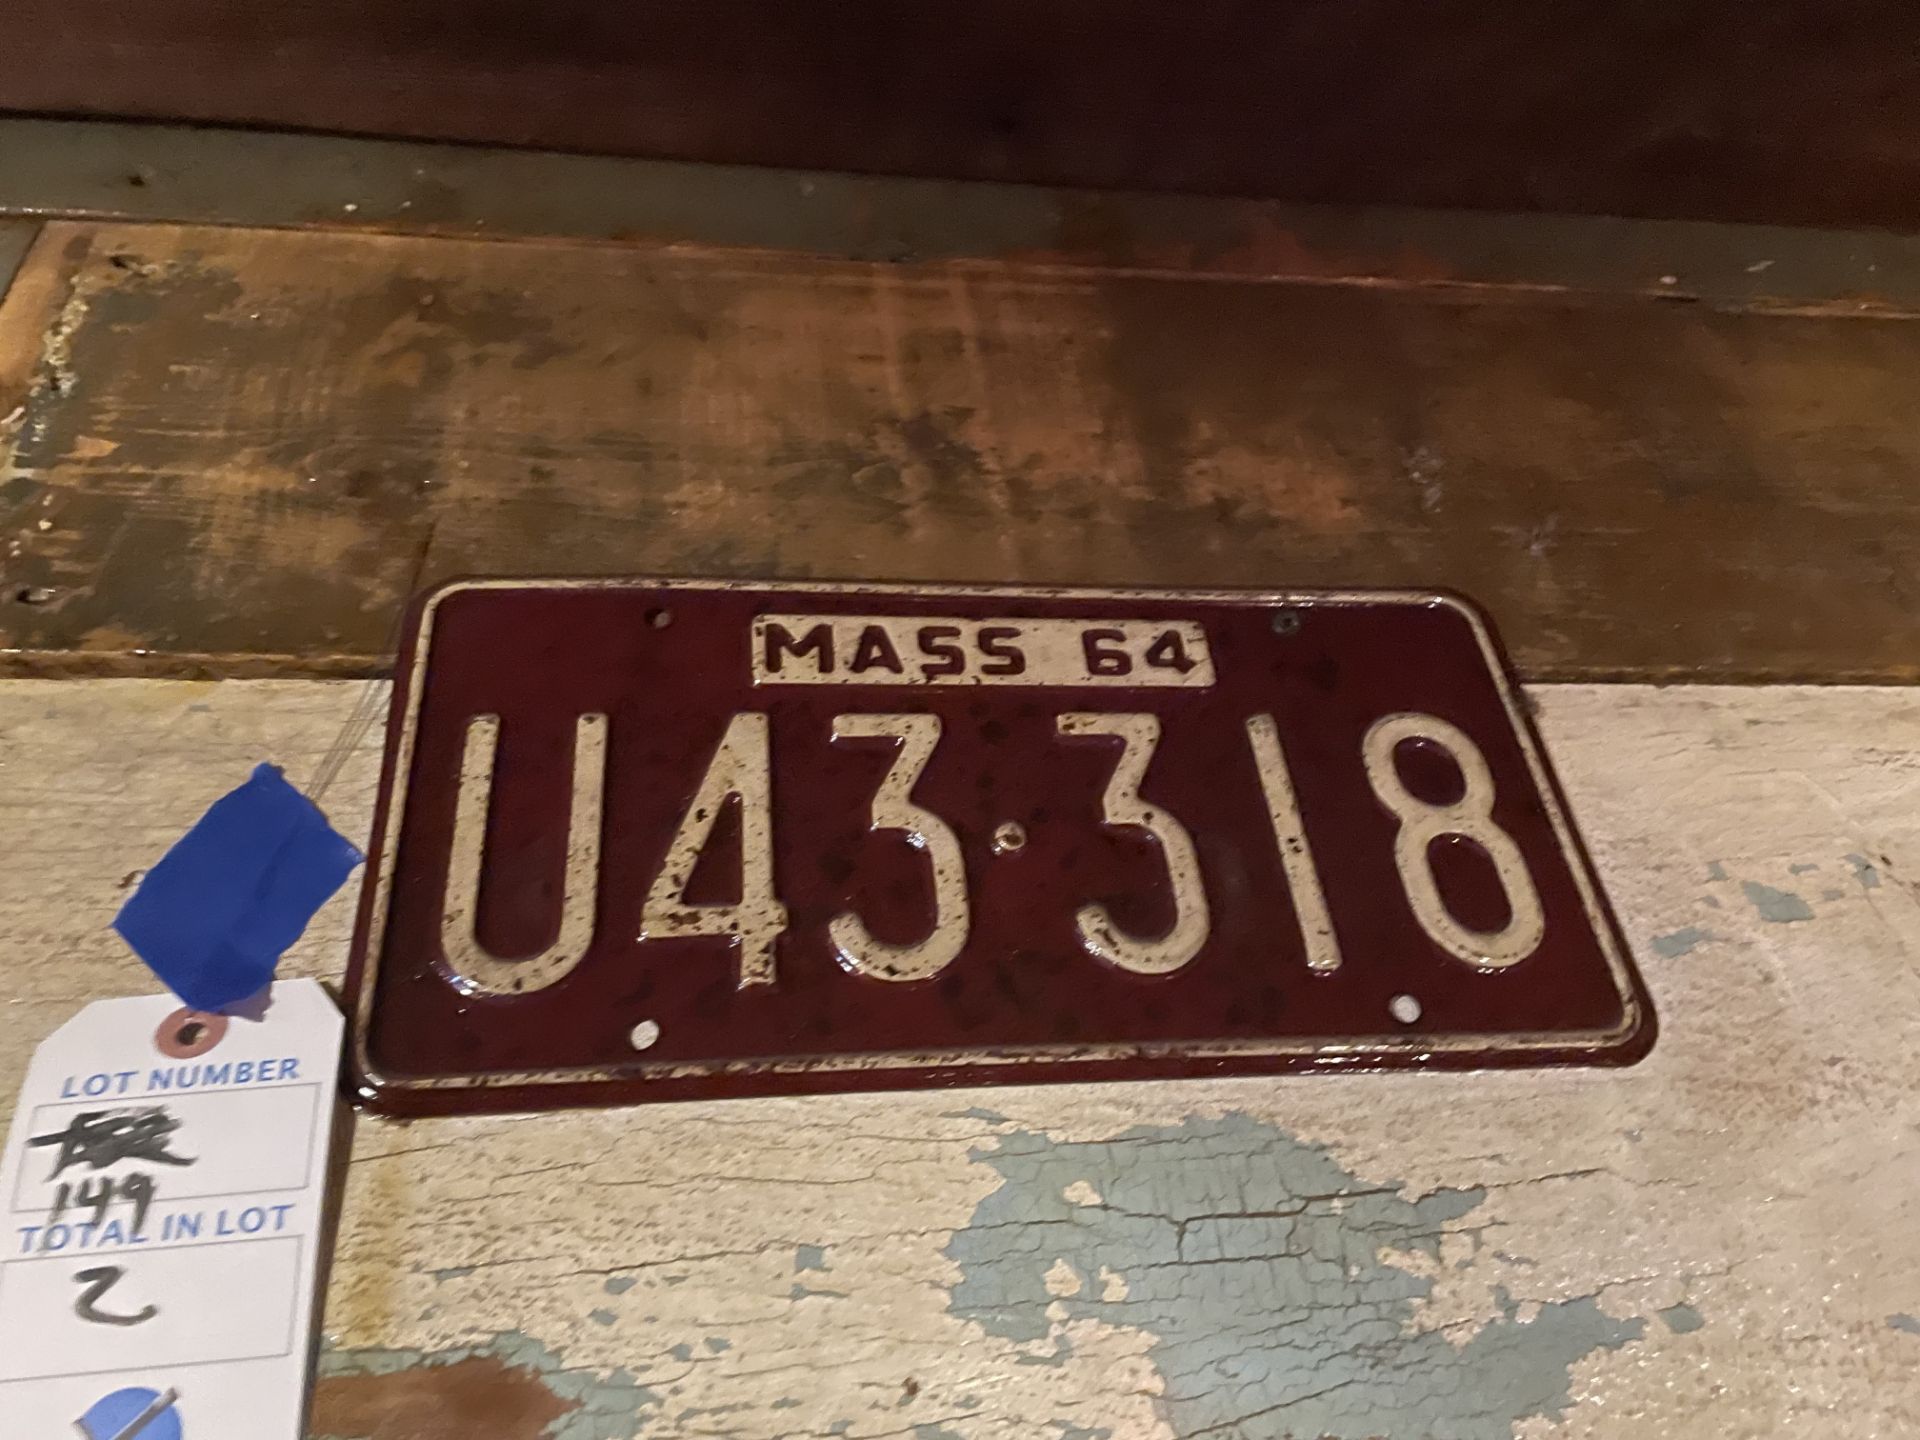 (2) Vintage License Plates - MA 1964 & Other Not Legible - Image 2 of 2